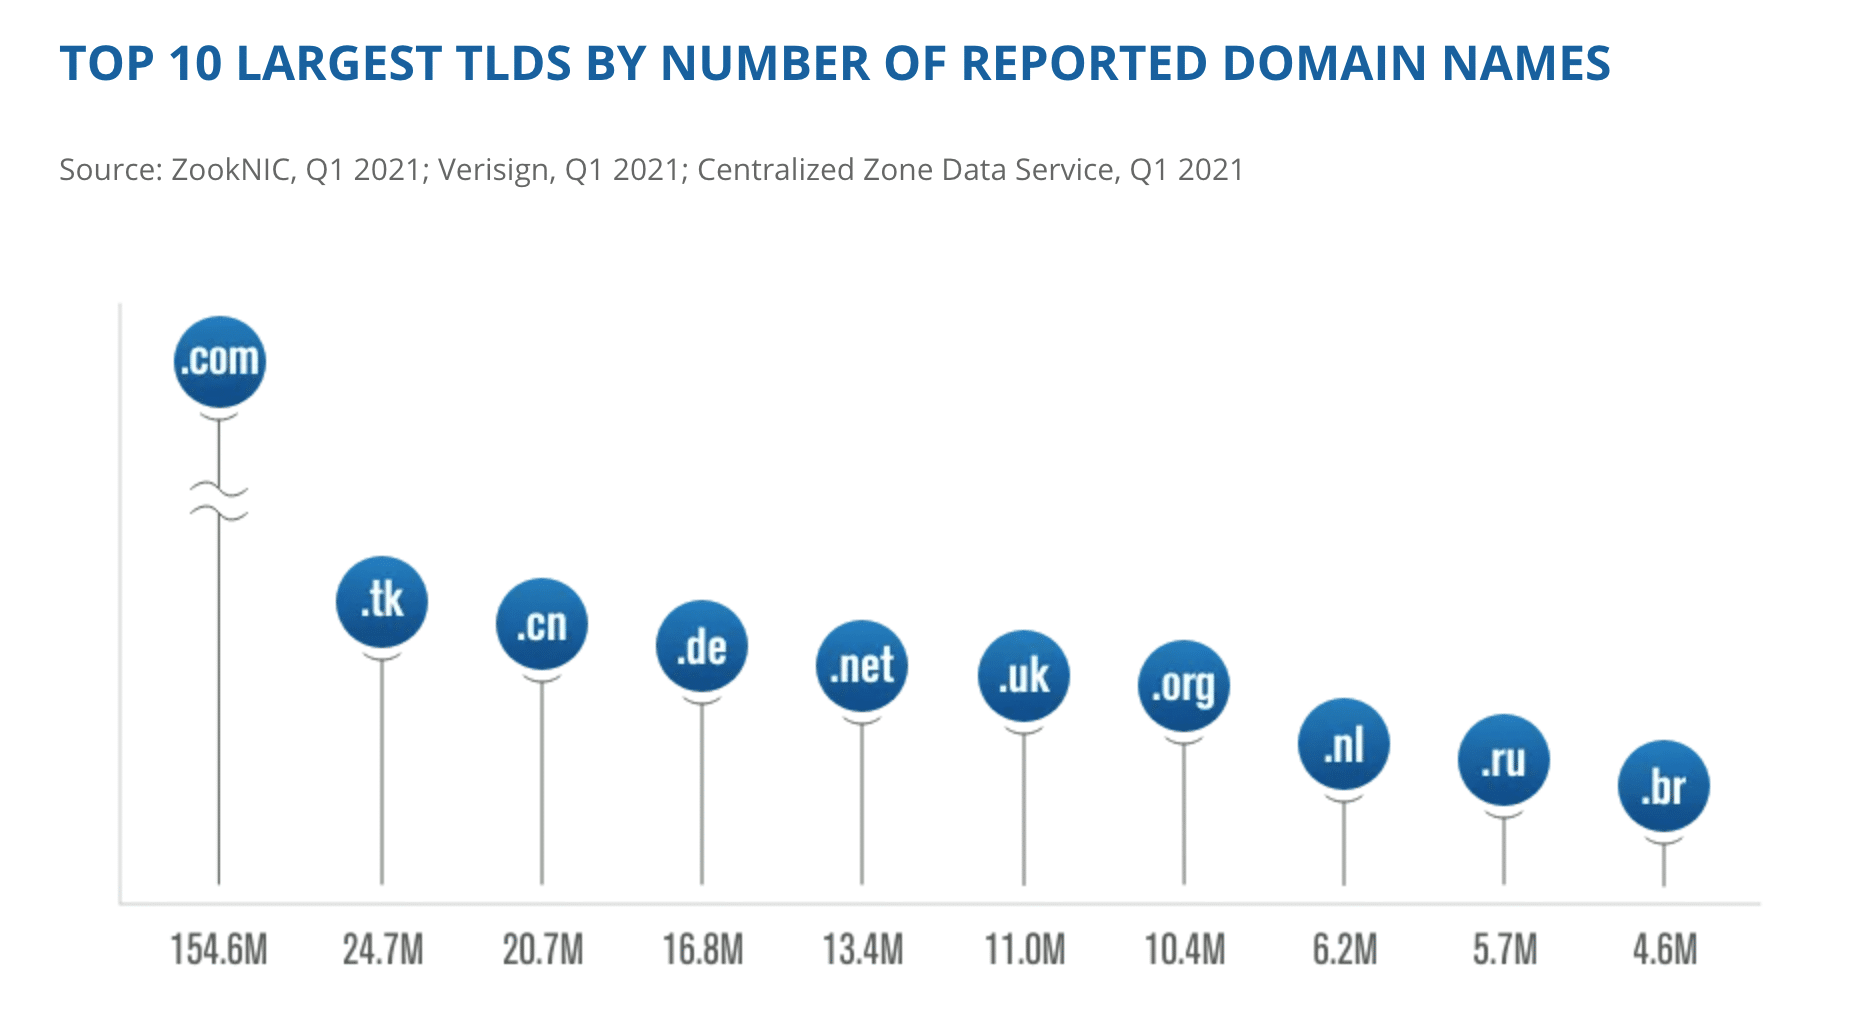 Top 10 largest TLDs by number of reported domain names.